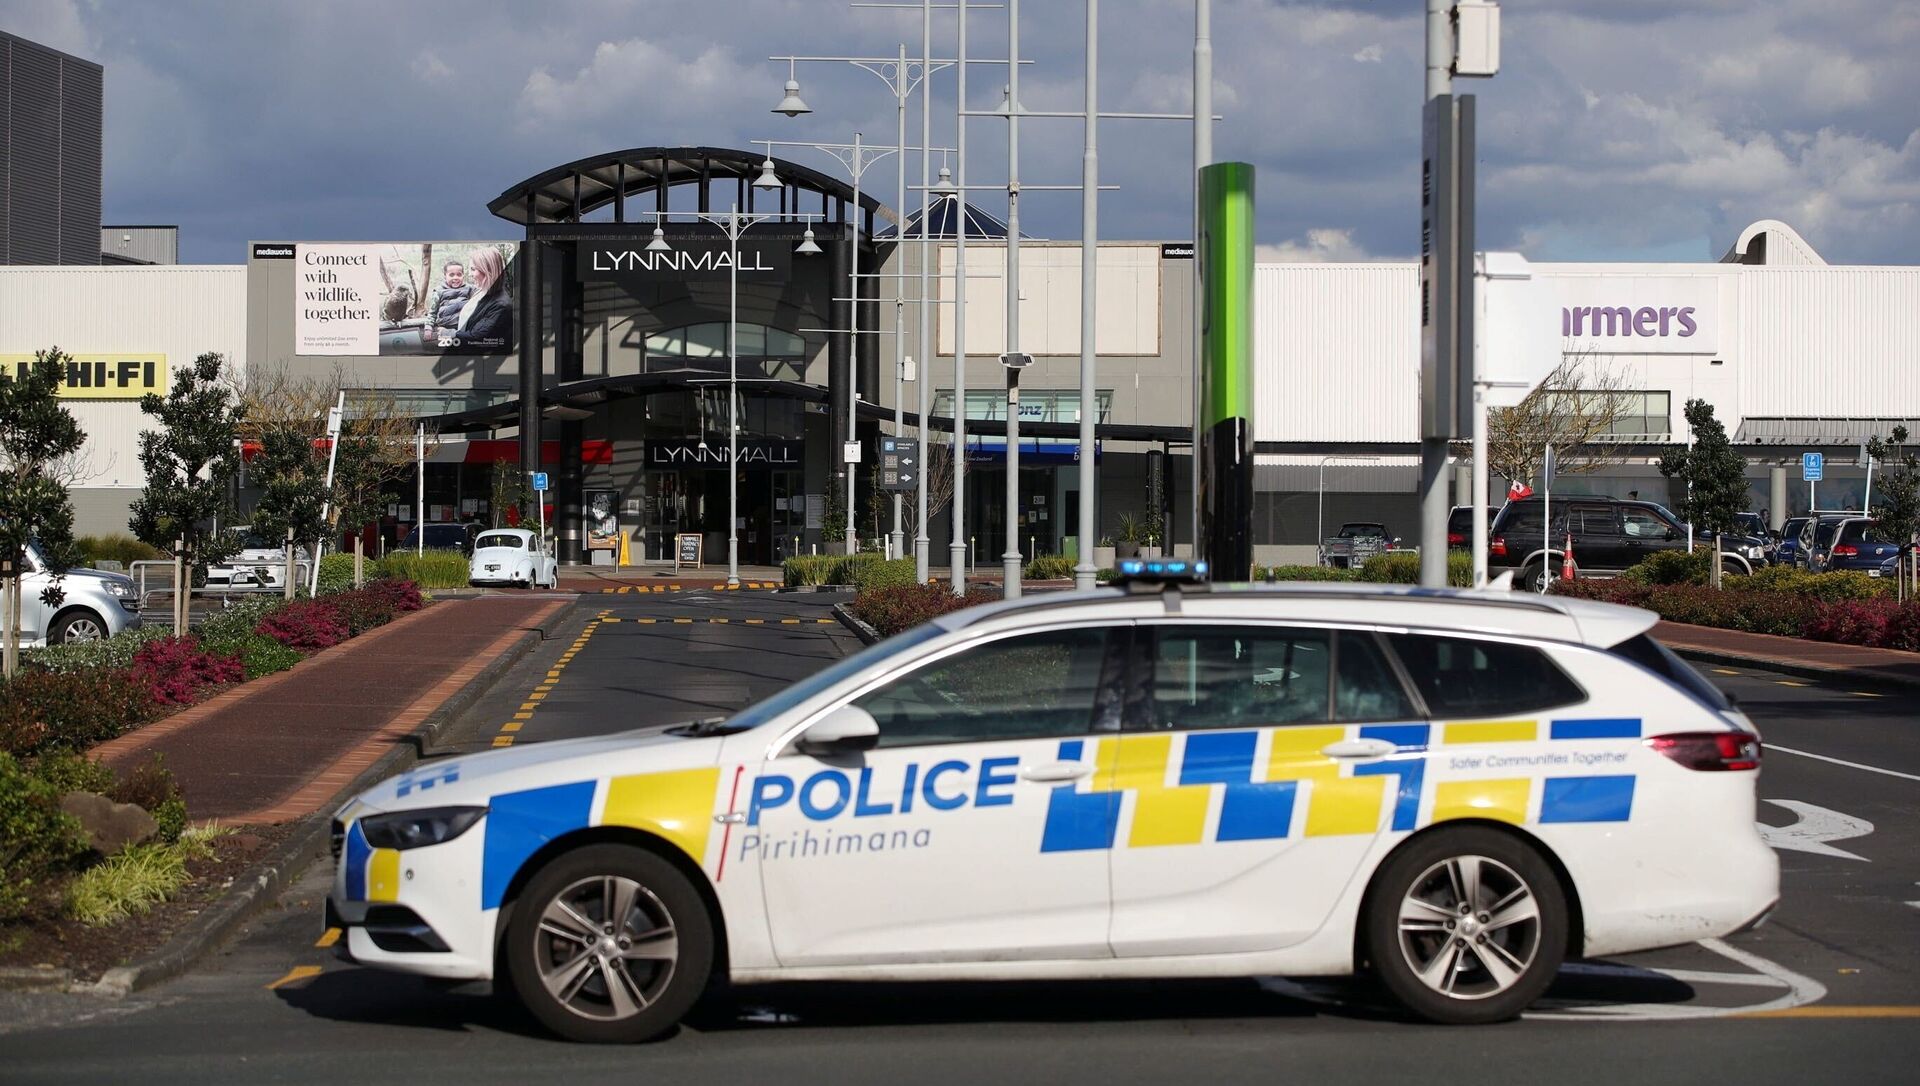 Police respond to the scene of an attack carried out by a man shot dead by police after he injured multiple people at a shopping mall in Auckland, New Zealand, September 3, 2021 - Sputnik International, 1920, 03.09.2021